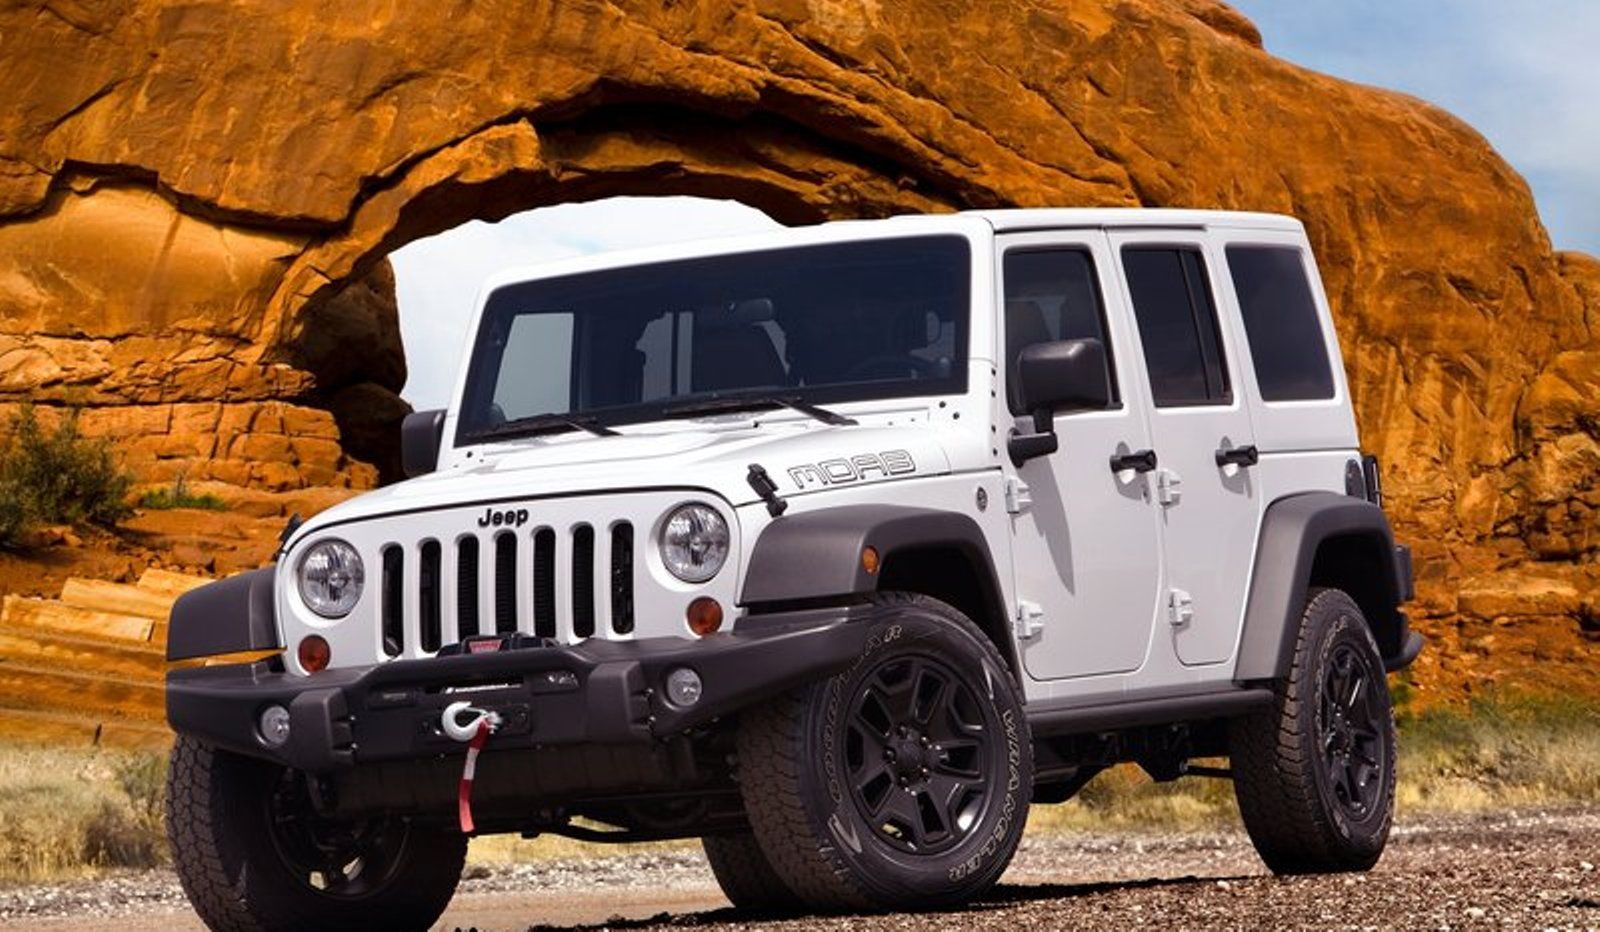 Free download Wrangler Wallpaper Jeep Wrangler Unlimited Sahara Gallery Wallpaper [1600x932] for your Desktop, Mobile & Tablet. Explore Jeep Wrangler Wallpaper with Chick. Jeep Wrangler Wallpaper Widescreen, Lifted Jeep